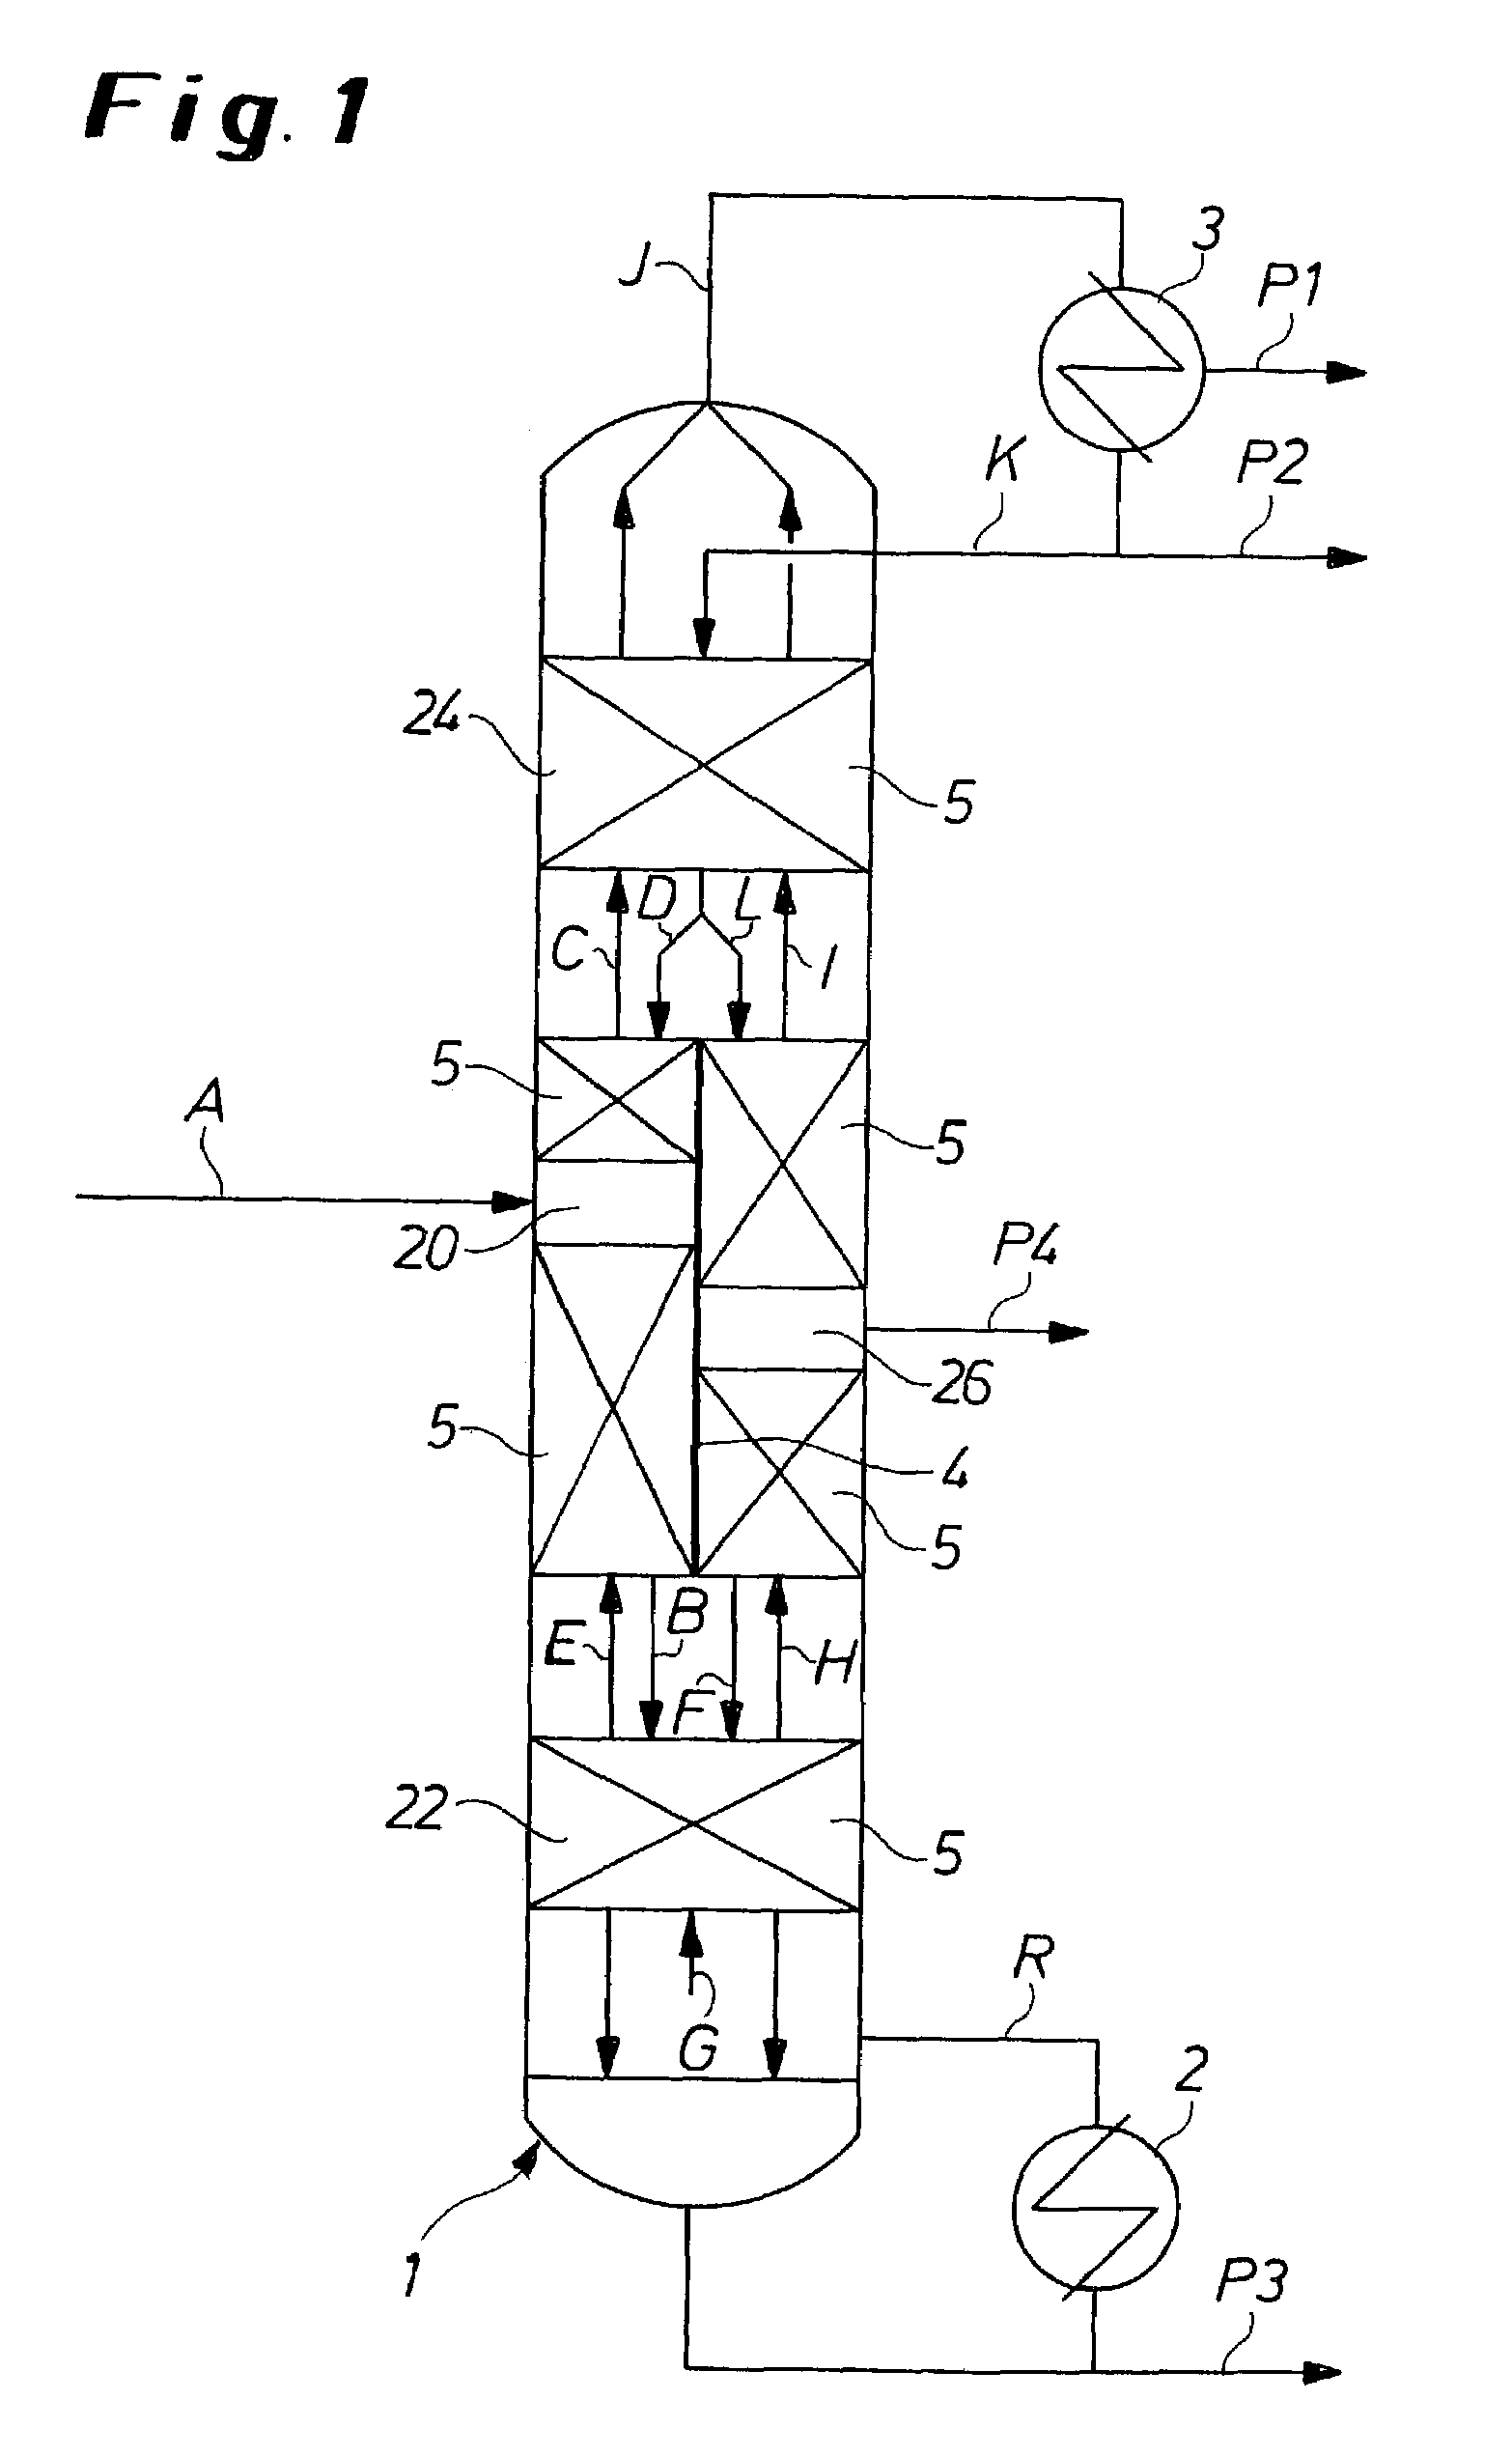 Process for the purification of mixtures of toluenediisocyanate incorporating a dividing-wall distillation column